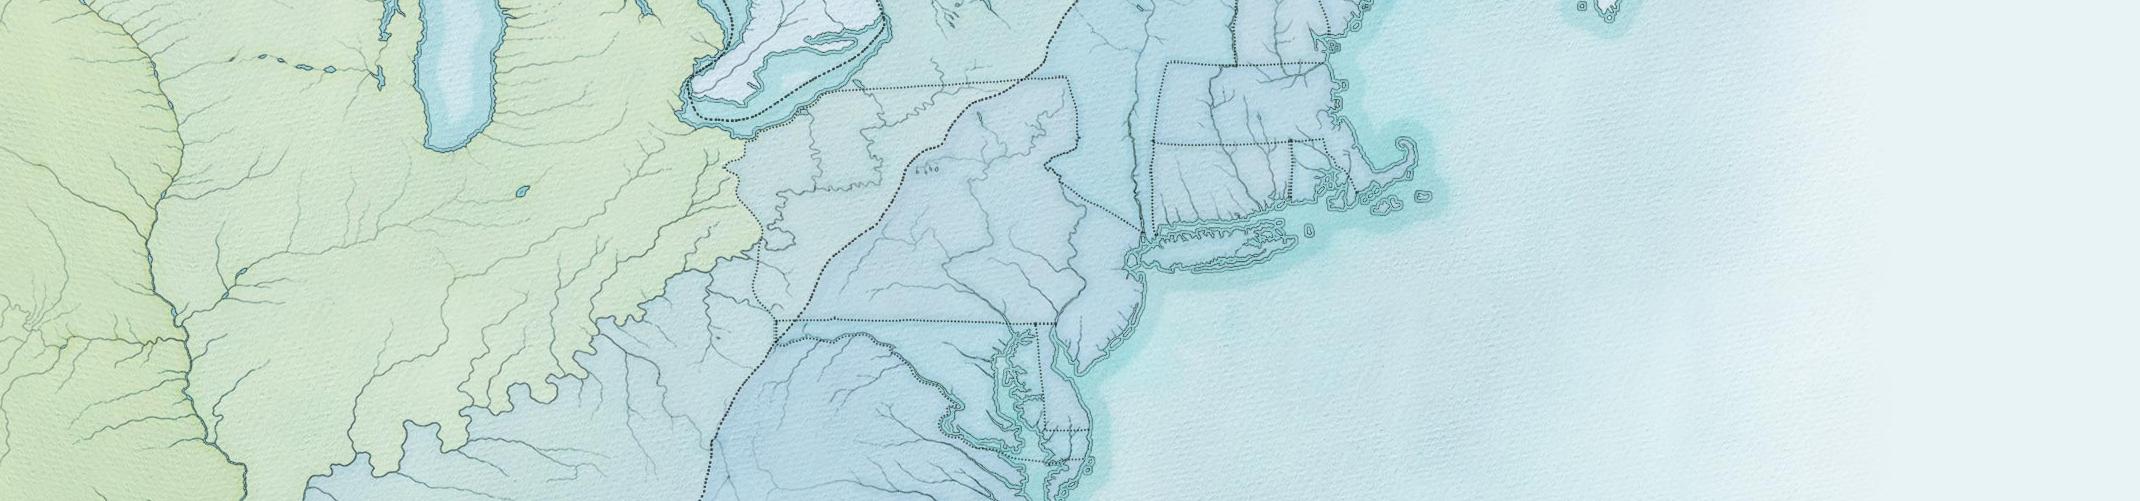 Illustration of the eastern coast of the United States